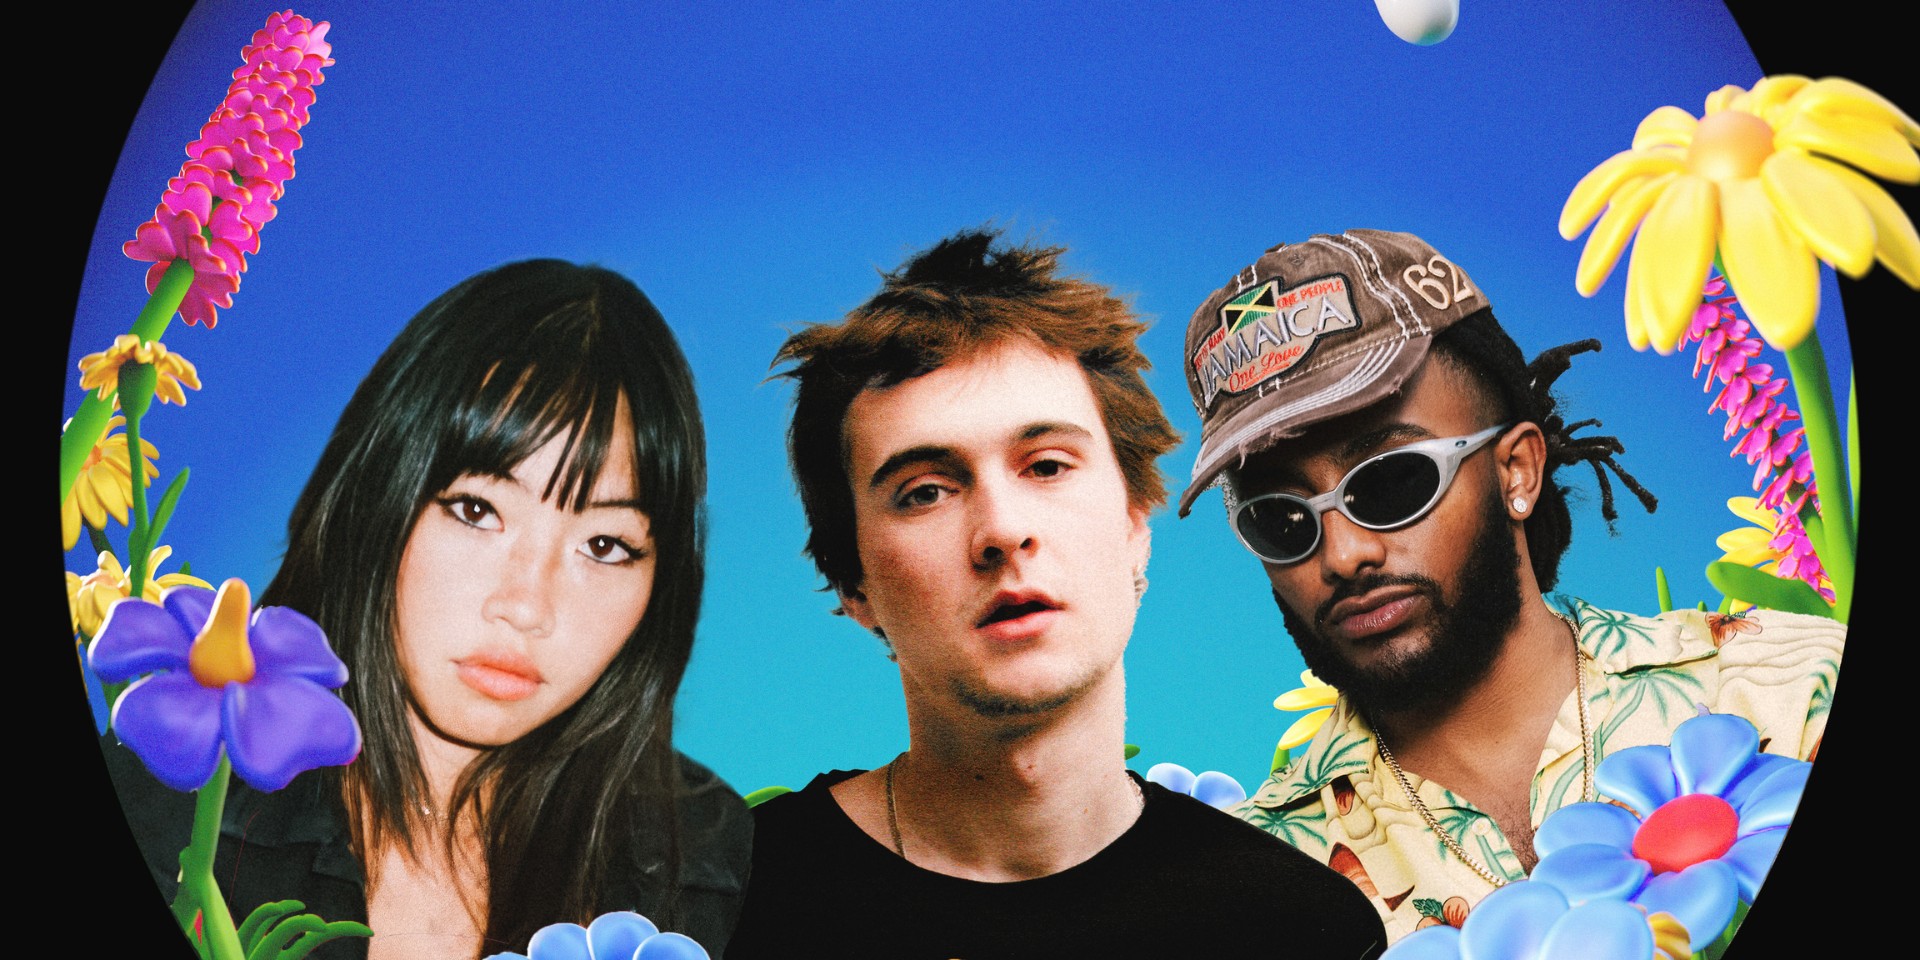 Mac Wetha joins forces with Beabadoobee and Aminé in new collaborative single, ‘Fear of Flying’ – watch